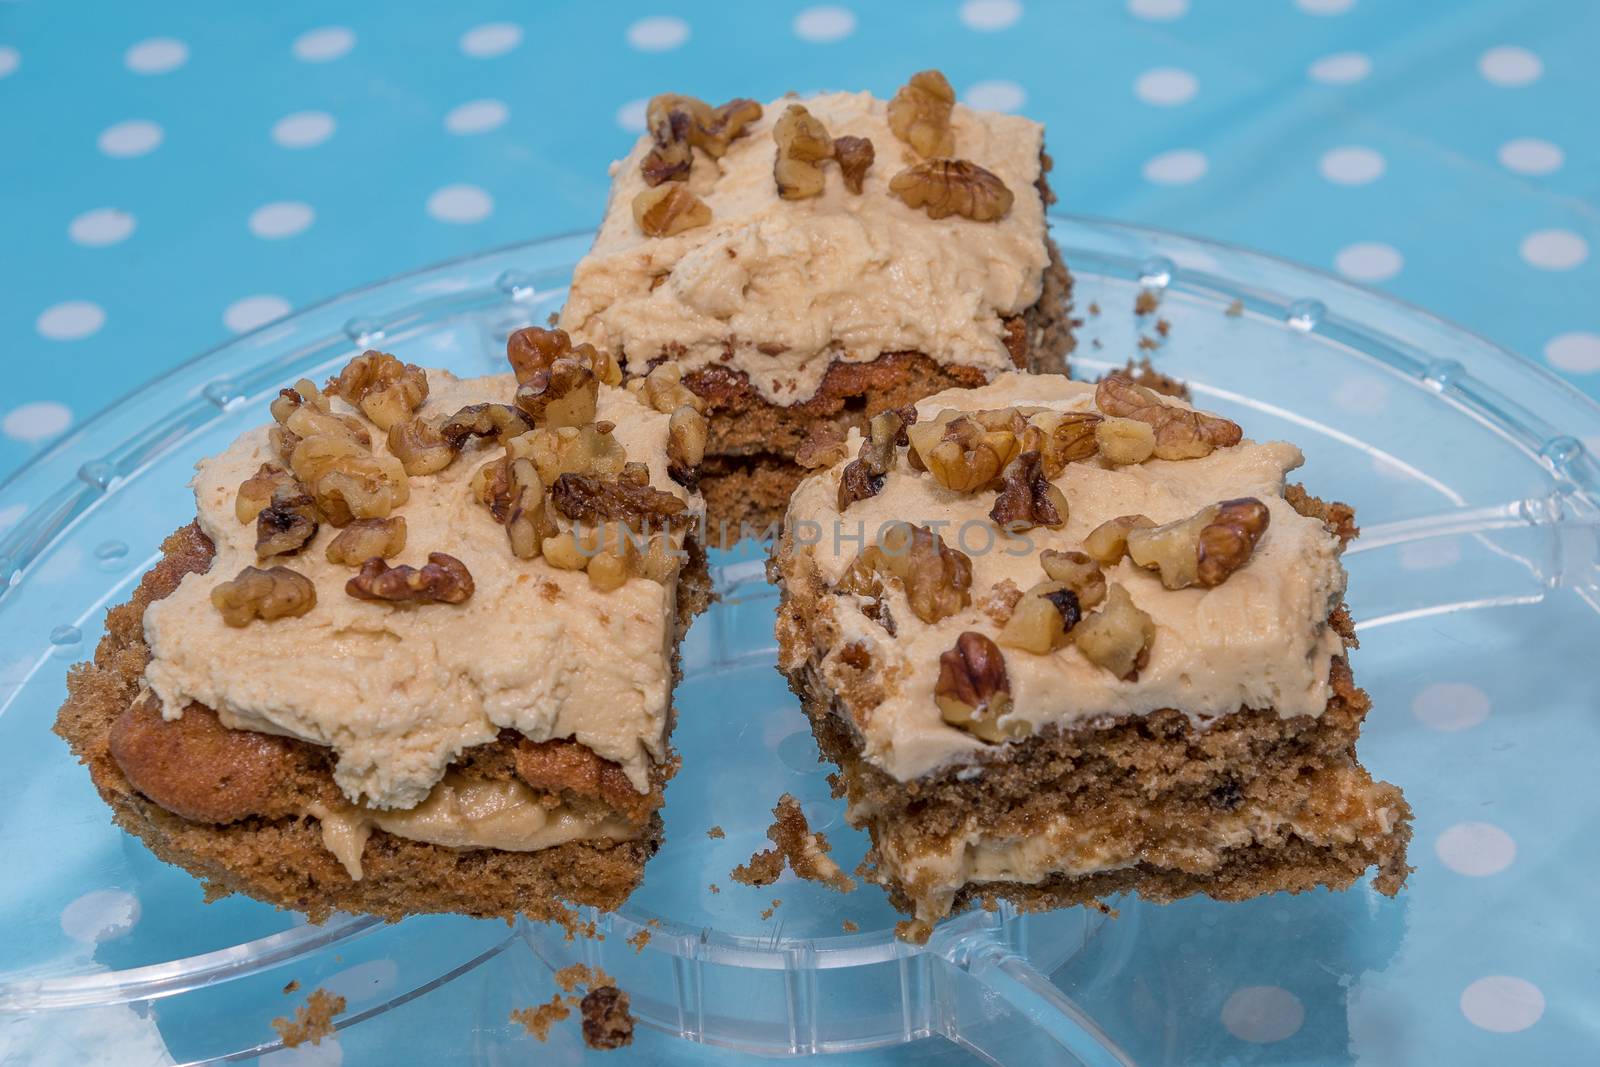 Coffee and Walnut cake slices on a glass plate